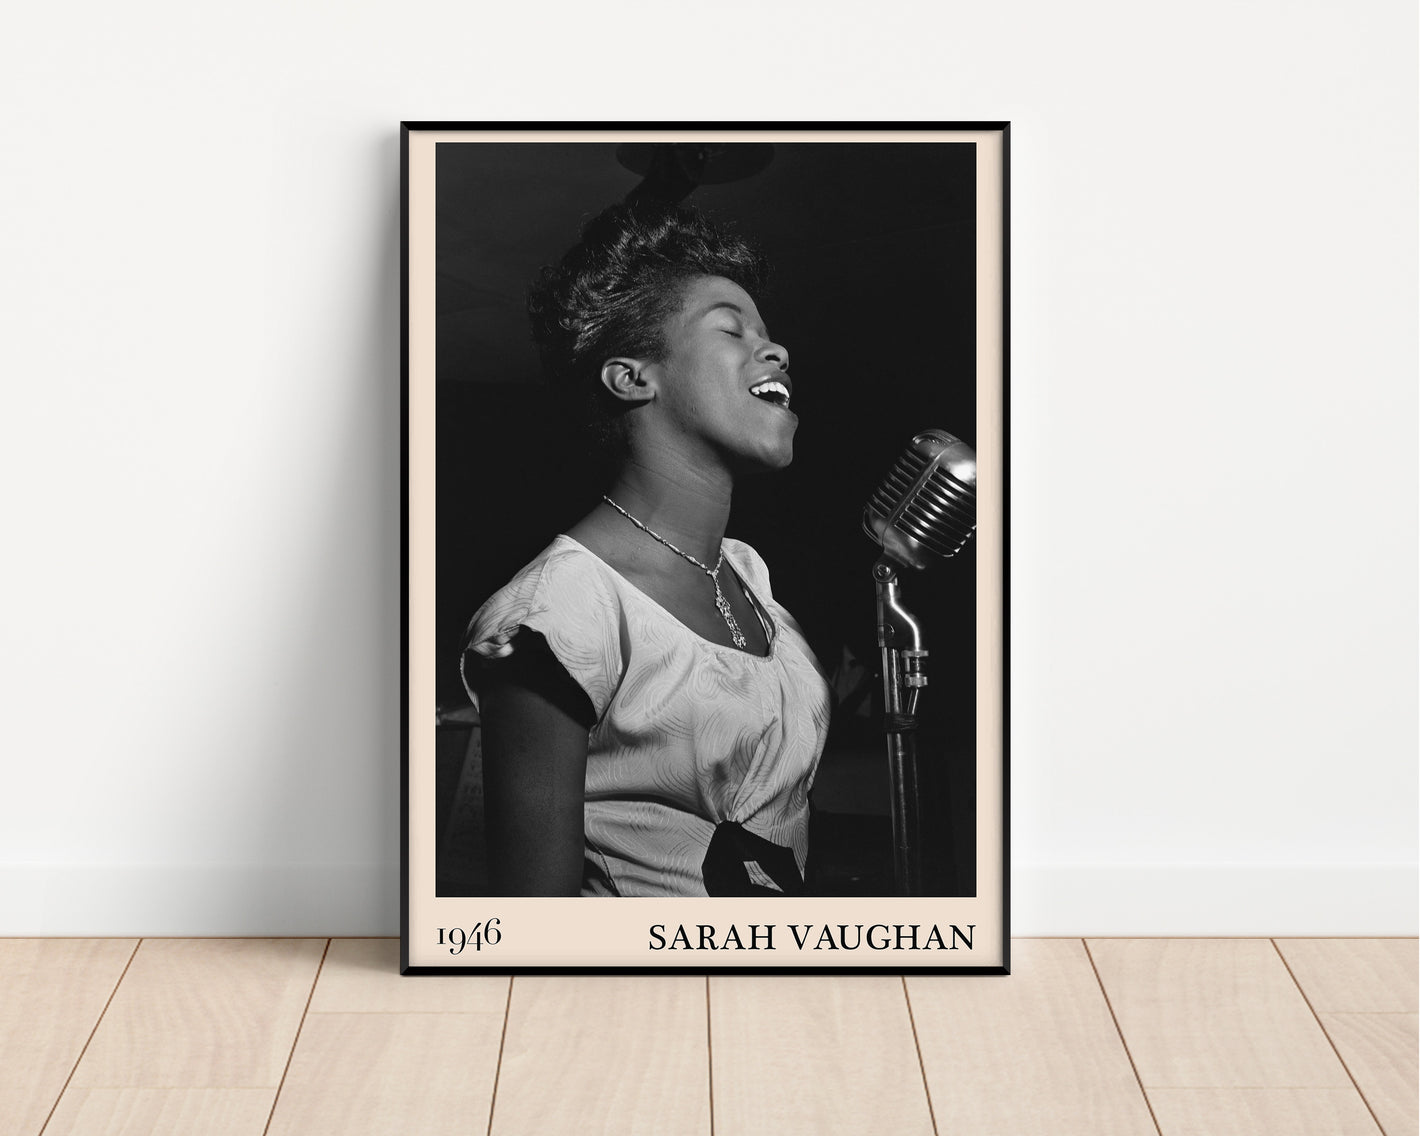 1946 photograph of Sarah Vaughan crafted into a black framed poster. The poster is resting on a white living room wall.